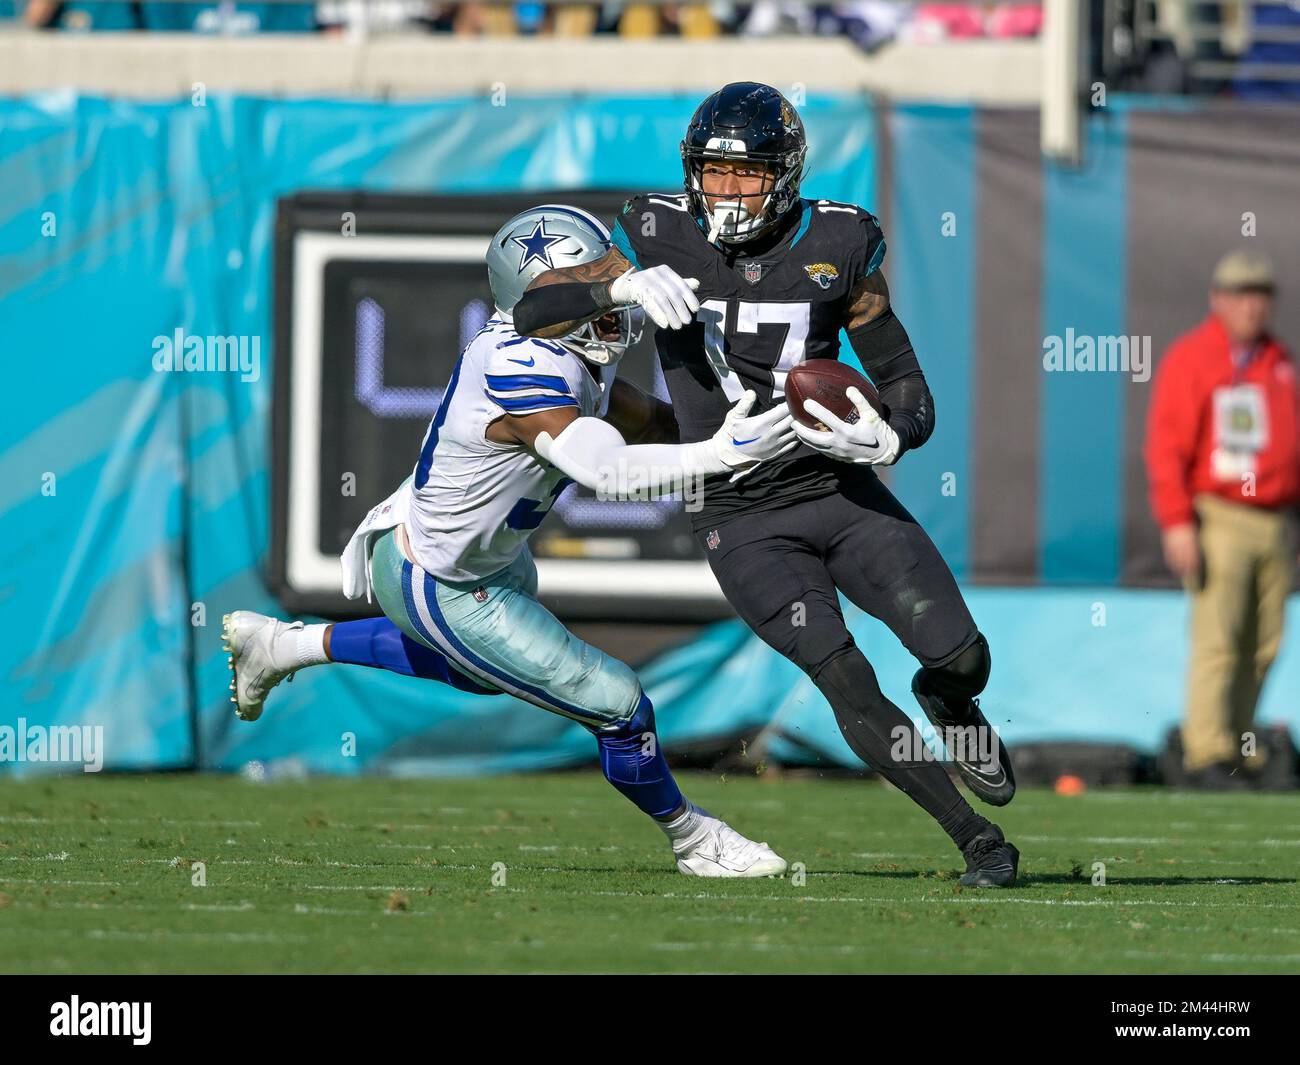 Jacksonville, FL, USA. 18th Dec, 2022. Jacksonville Jaguars tight end Evan Engram (17) runs with the ball after catch while being defended by Dallas Cowboys linebacker Damone Clark (33) during a game in Jacksonville, FL. Romeo T Guzman/CSM/Alamy Live News Stock Photo